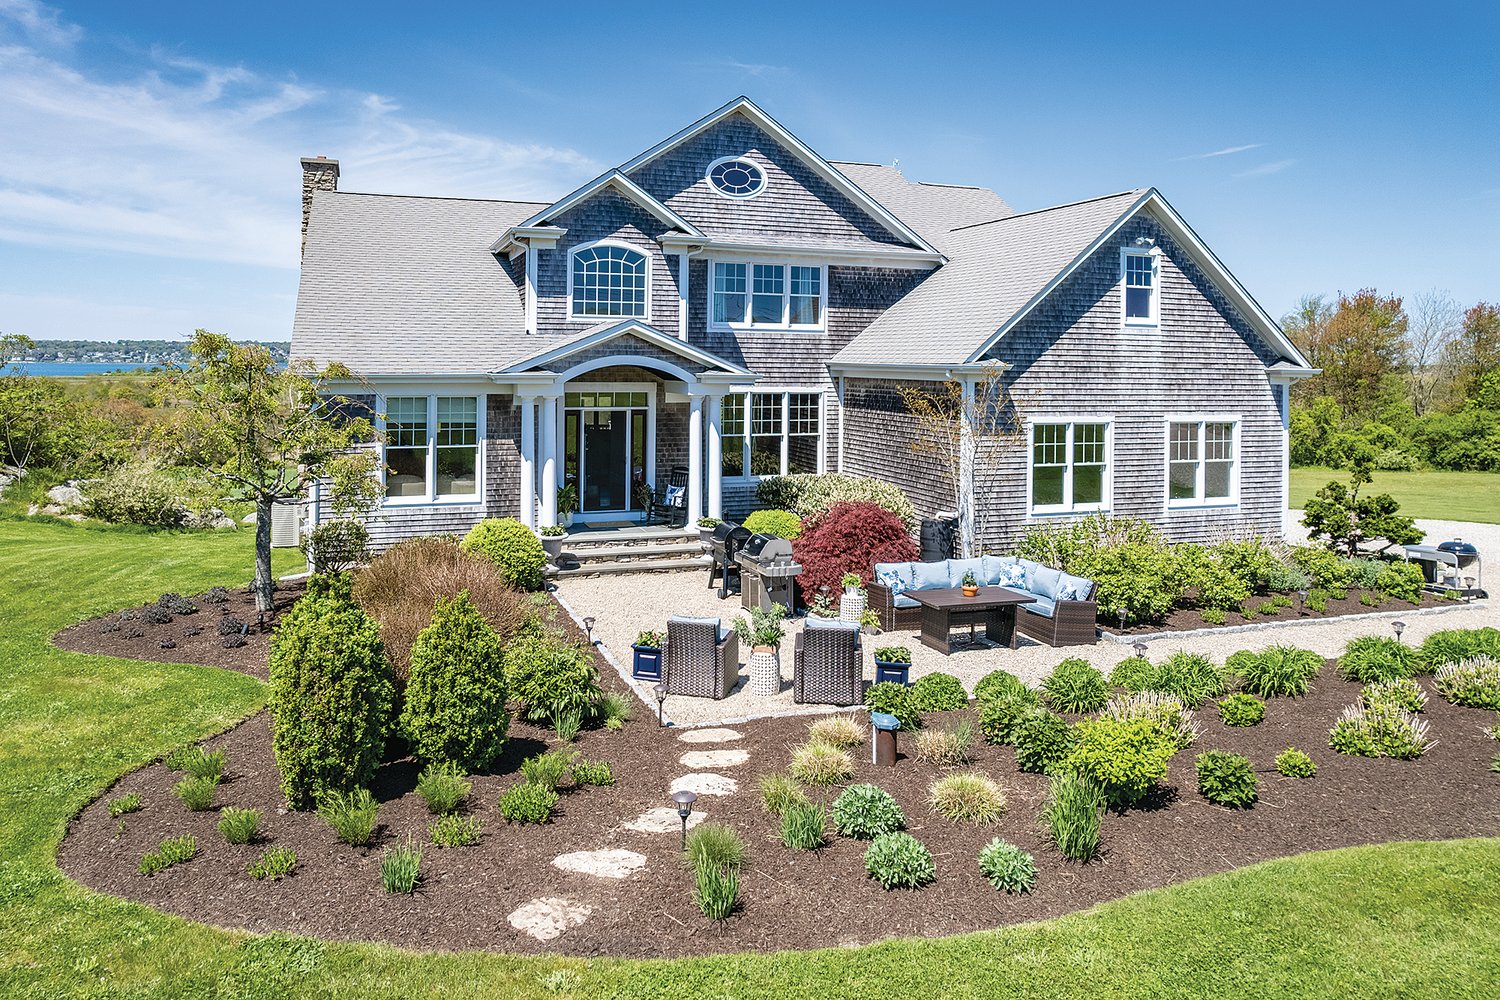 This Tiverton home is a good example of the real estate market in 2022. It listed for $1,950,000 and sold for over-asking at $2 million.